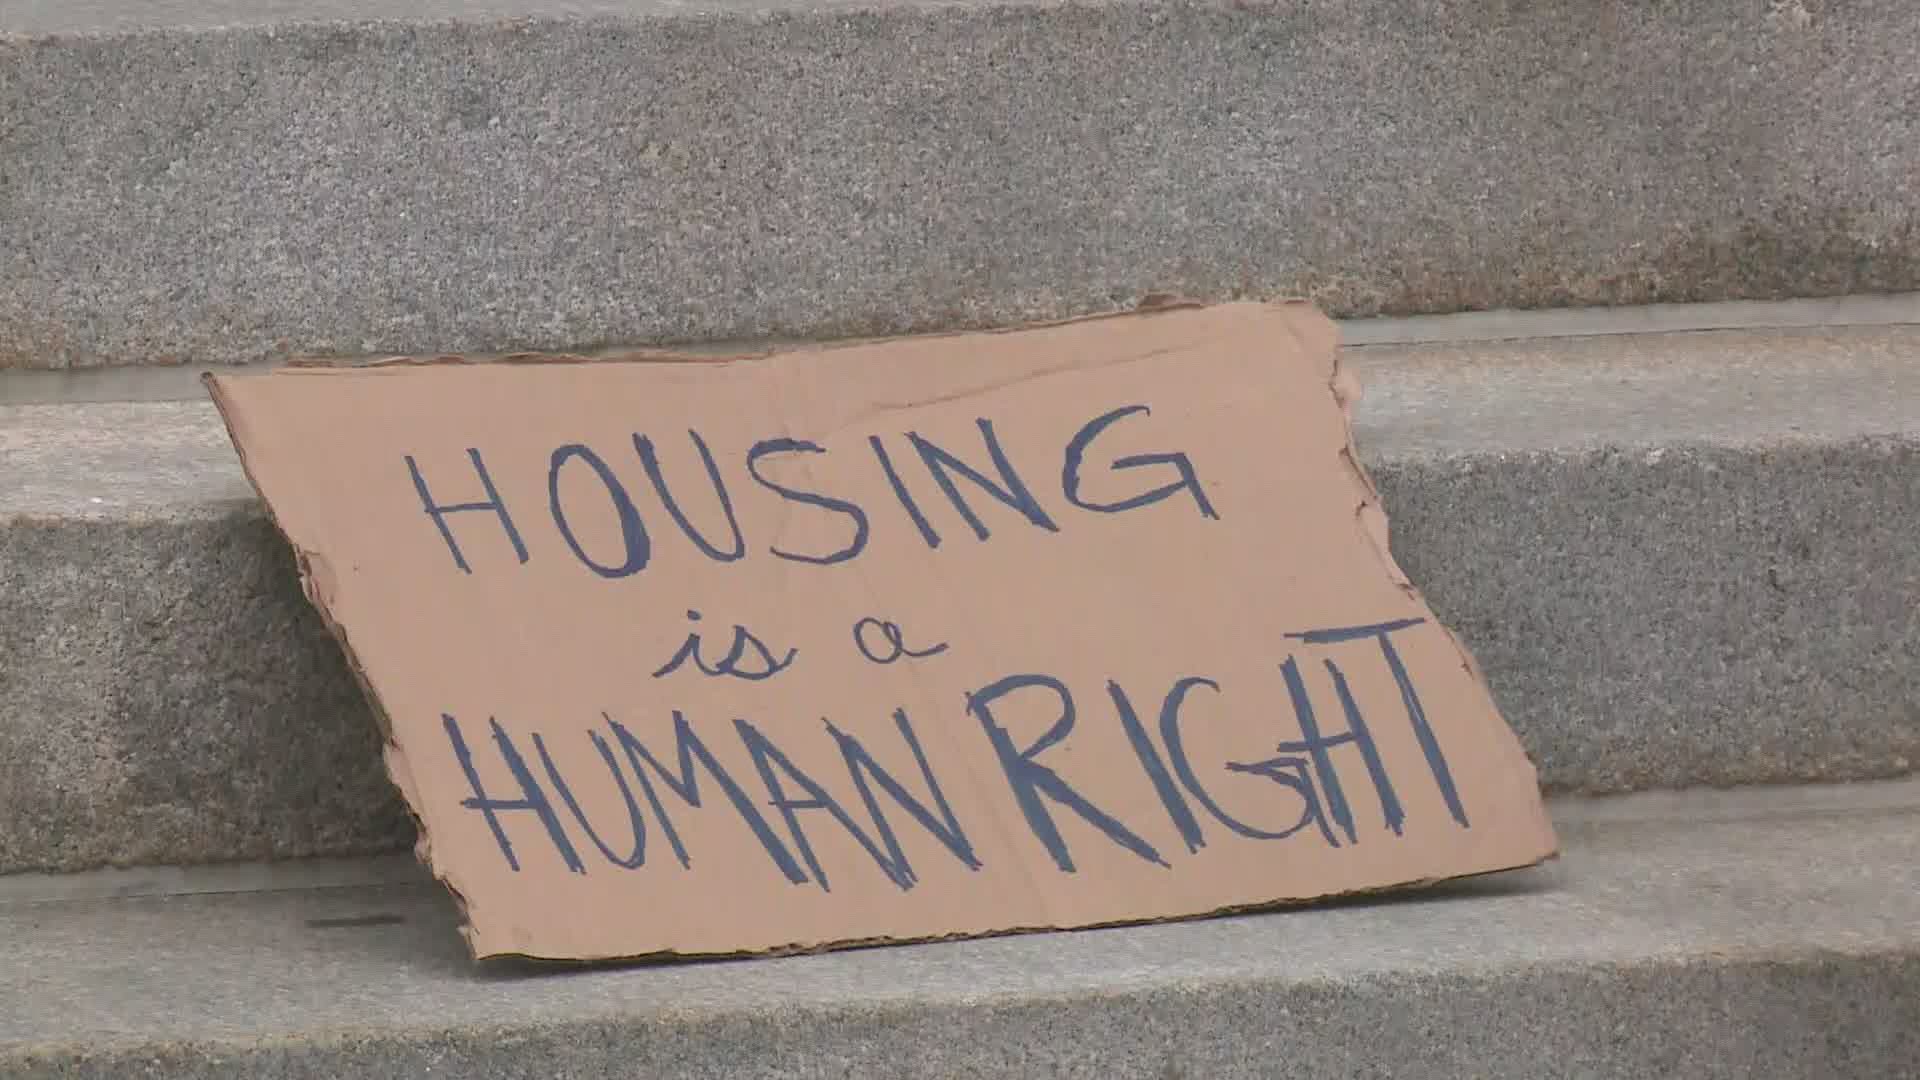 Some people in Portland held a "sleep out" at city hall in support of homeless people.